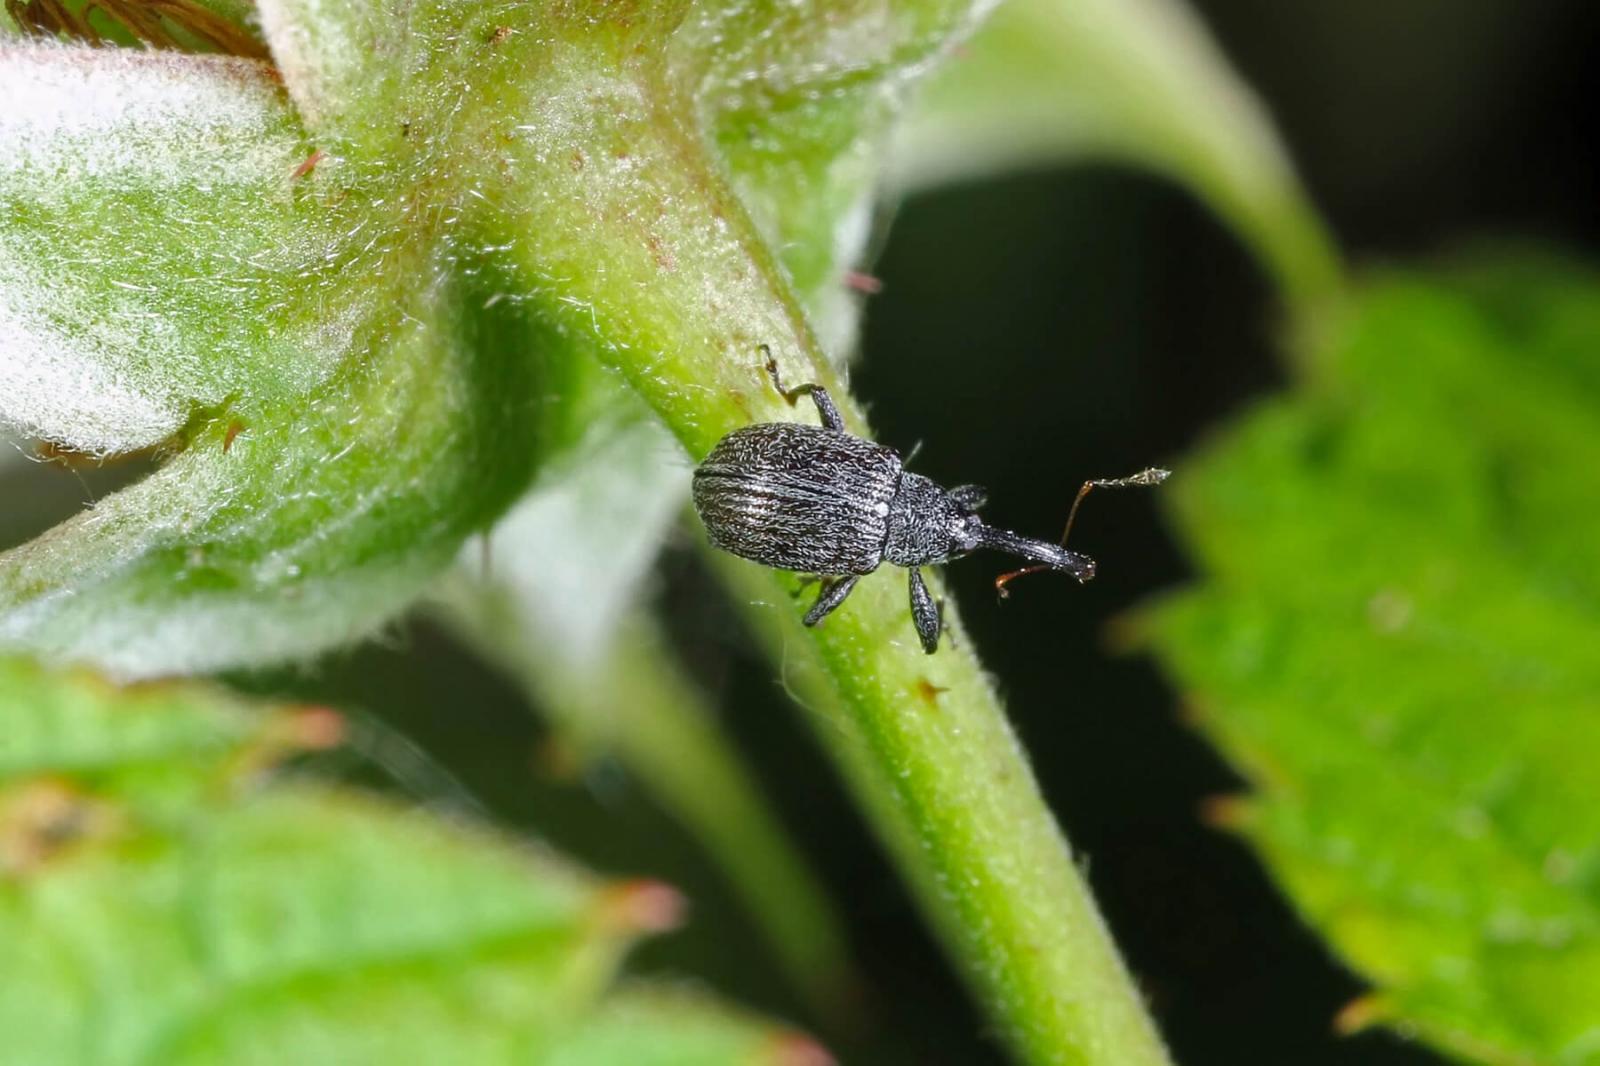 Strawberry Blossom Weevil pest module template approved